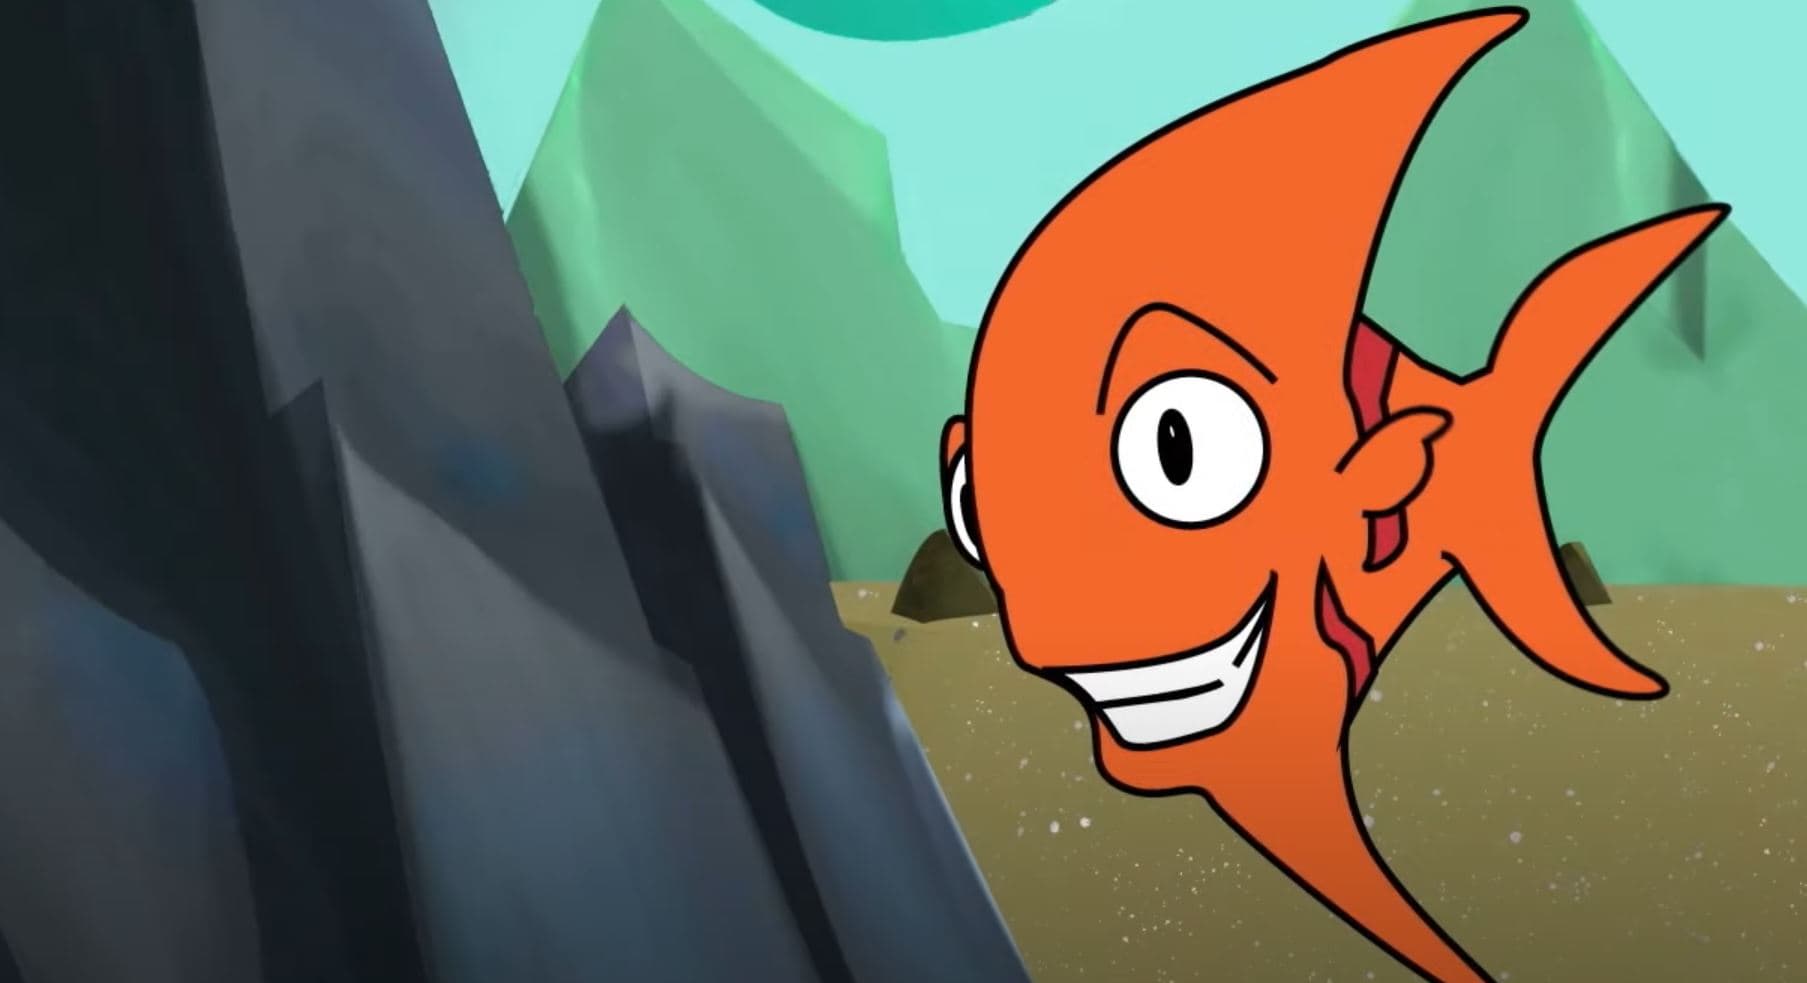 2d character animation of an orange colored fish